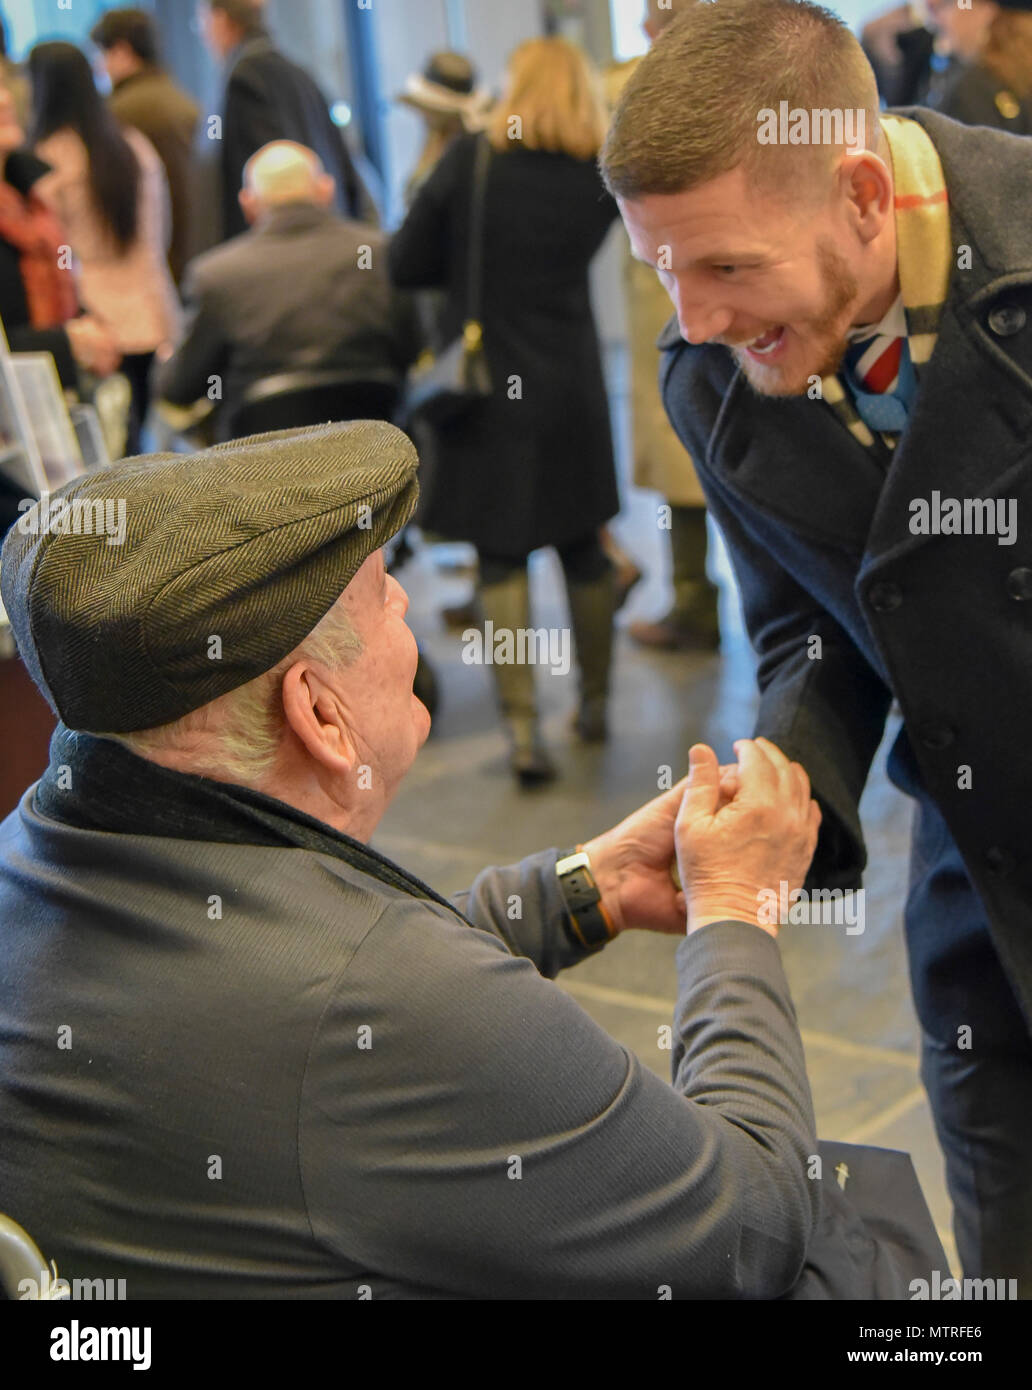 Former U.S. Army Spc. Kenneth Stumpf, Medal of Honor recipient and retired U.S. Marine Corps Cpl. William Kyle Carpenter, Medal of Honor recipient, exchange coins during a traditional Inaugural Day Medal of Honor breakfast held at the Reserve Officers Association headquarters in Washington D.C., January 20, 2017. (U.S. Army Reserve photo by Master Sgt. Marisol Walker/Released) Stock Photo